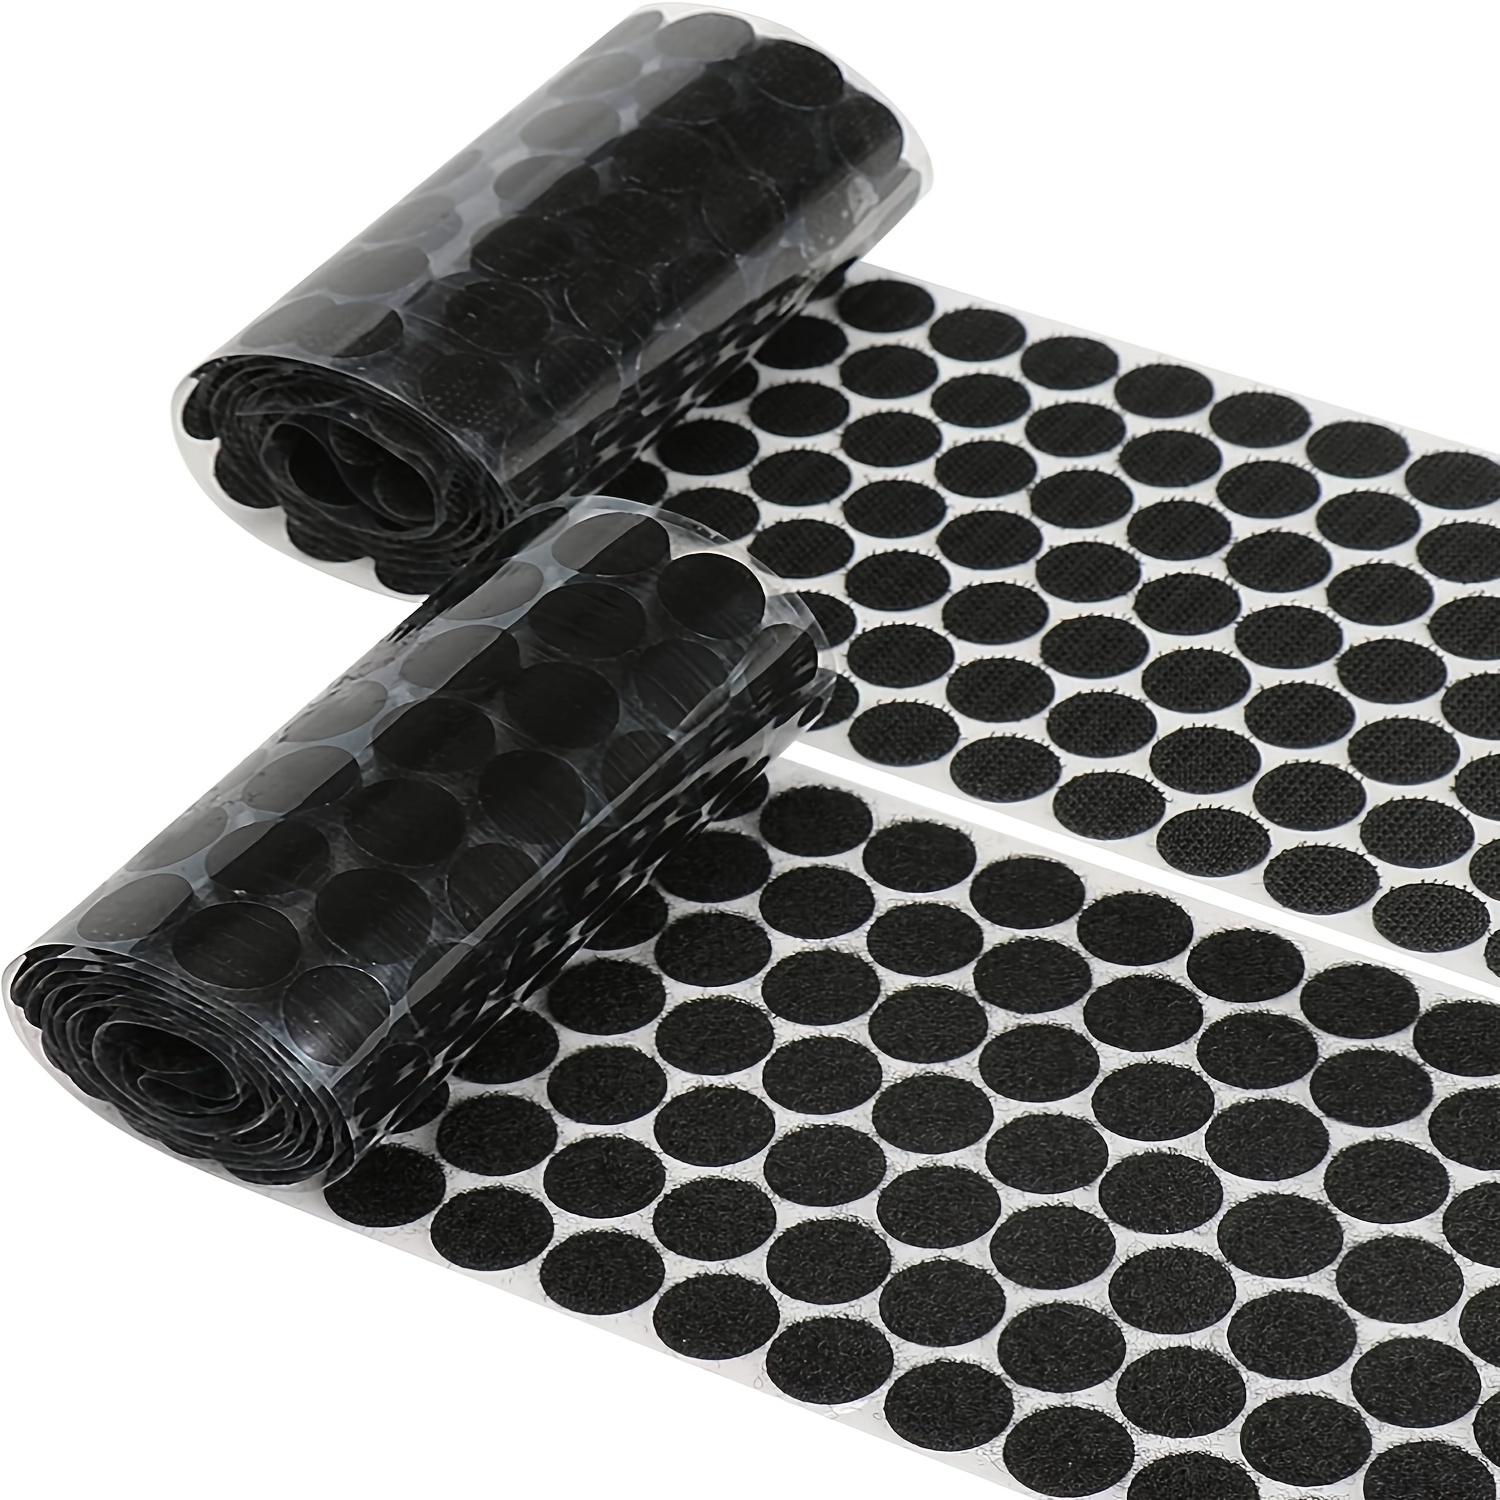 1000 Pieces 10mm Velcro Dots Self-adhesive 500 Pairs Self Adhesive Velcro  Dots